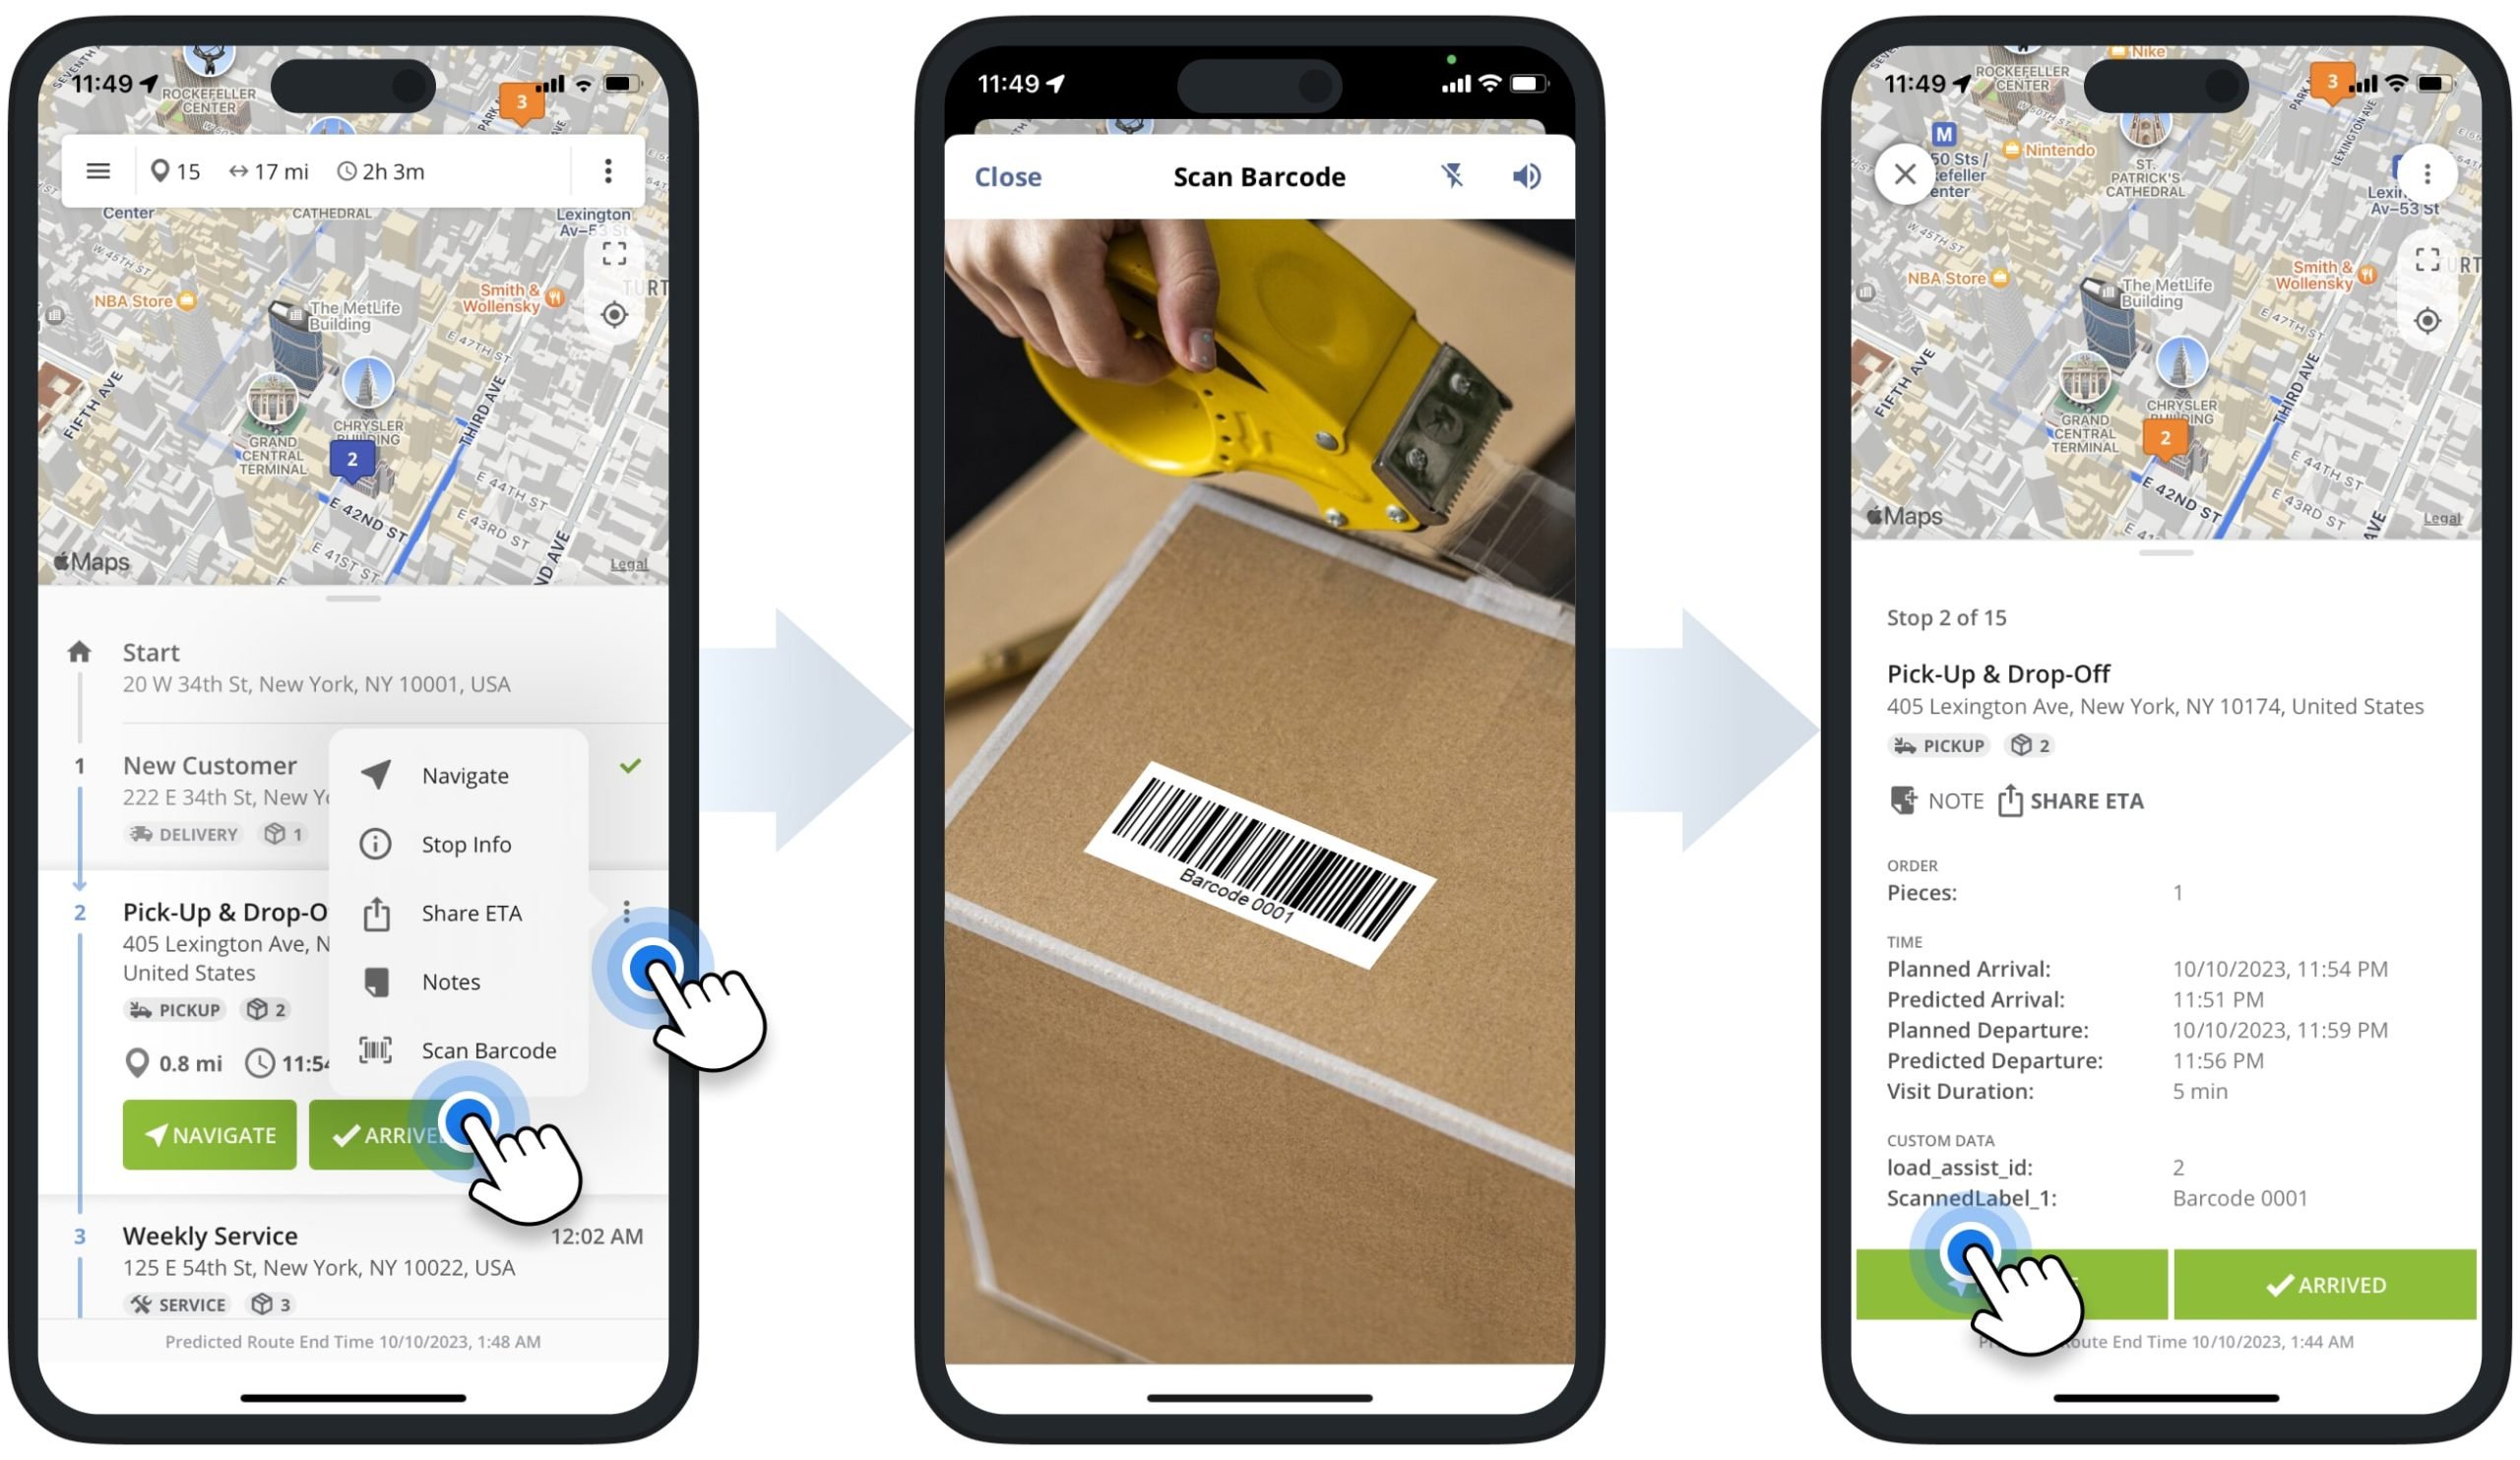 Using an integrated barcode scanner to scan QR codes and barcodes and attach custom data to stops on the iPhone Route Planner app.